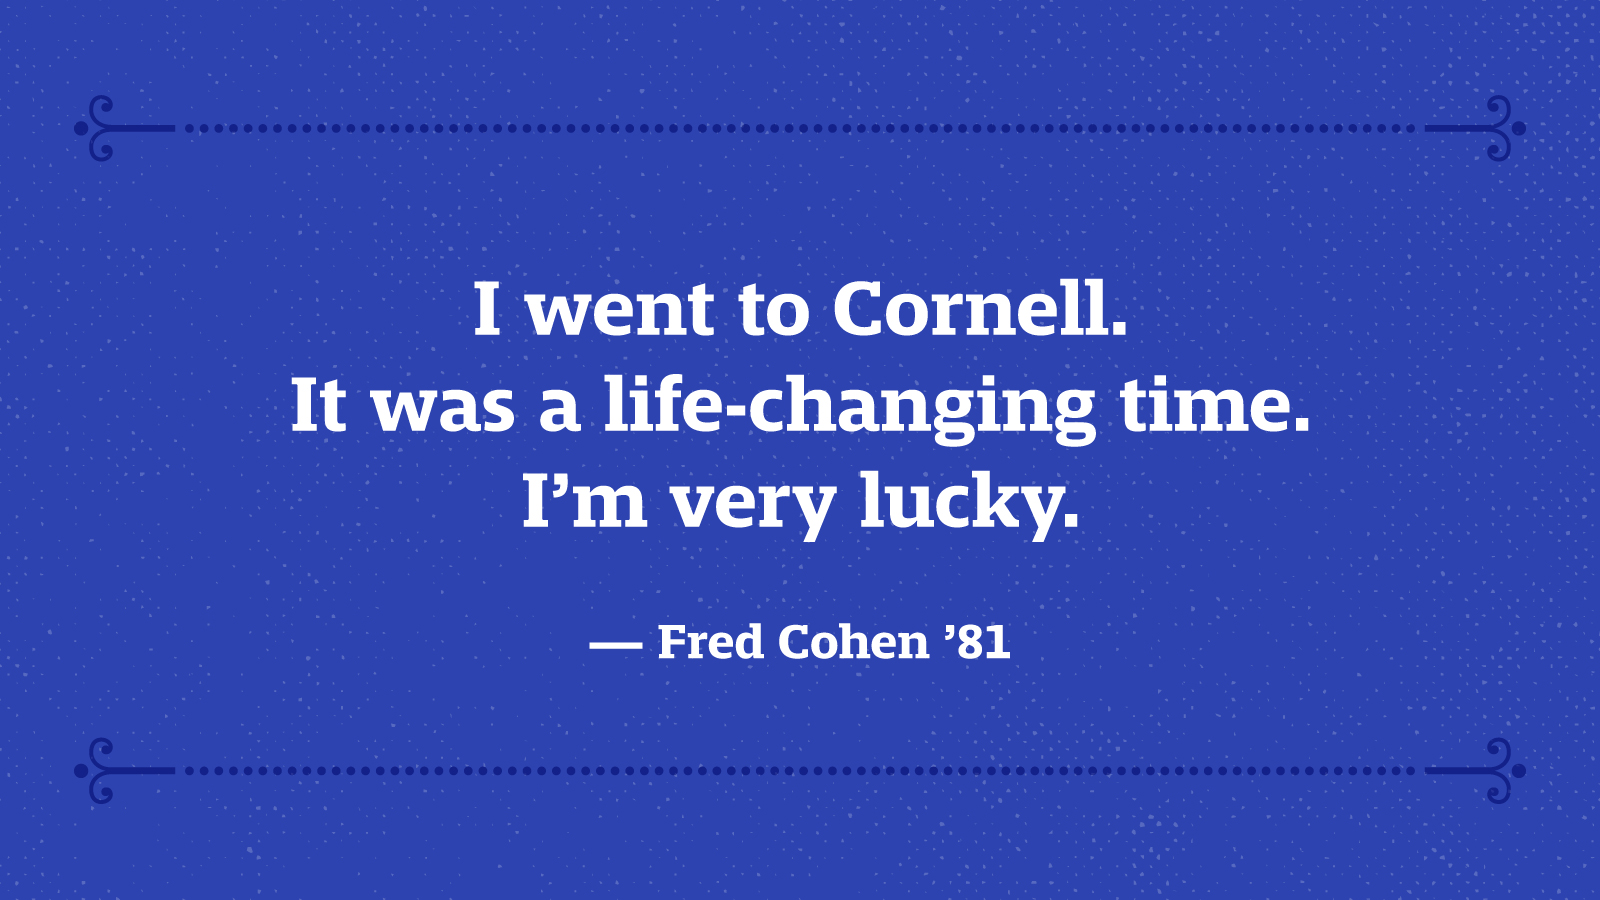 I went to Cornell. It was a life-changing time. I’m very lucky. — Fred Cohen ’81